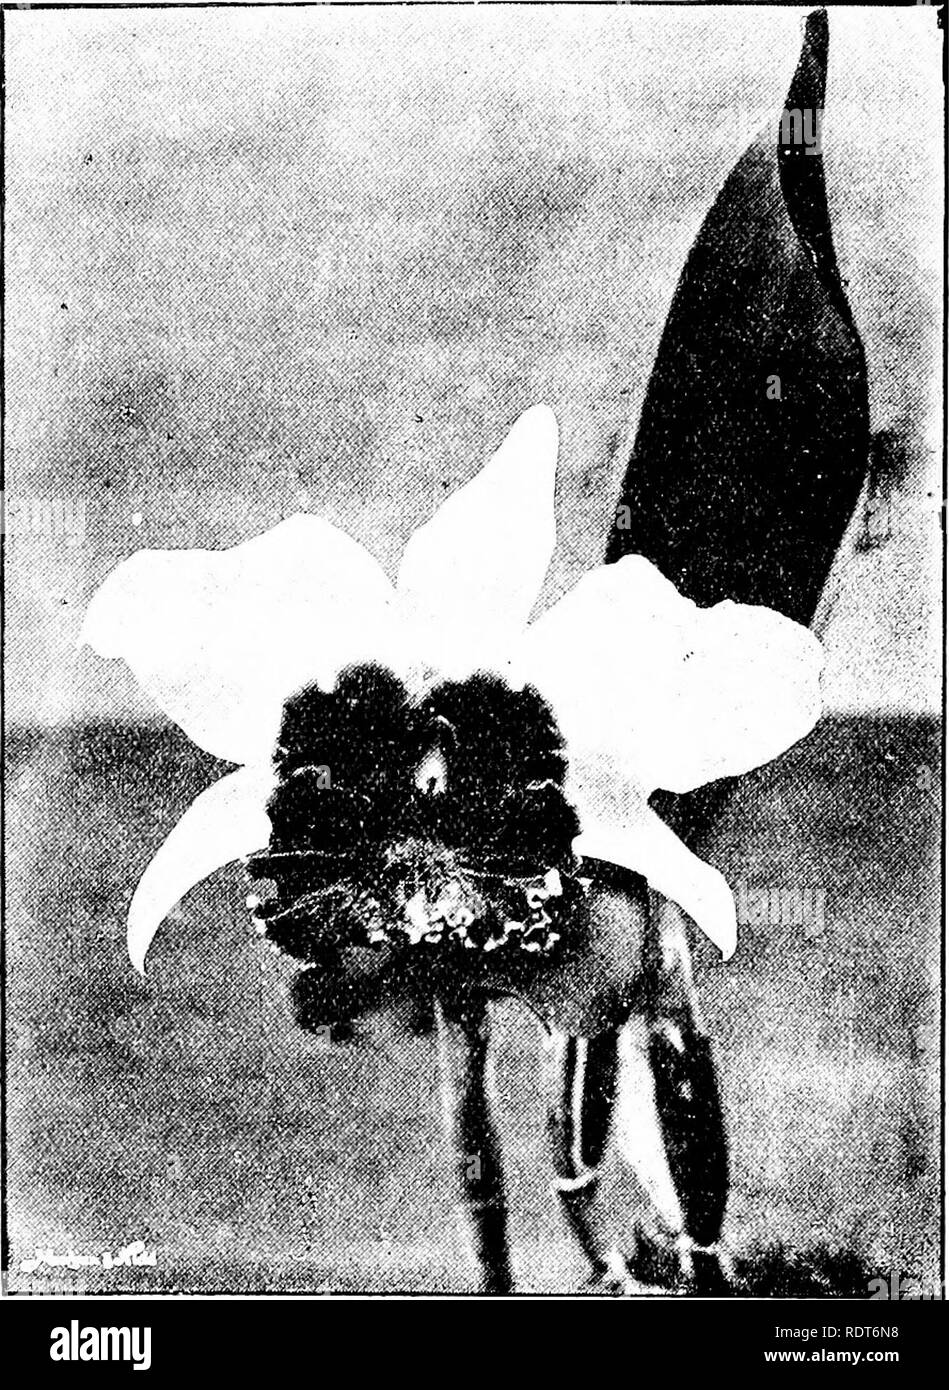 . The orchid stud-book: an enumeration of hybrid orchids of artificial origin, with their parents, raisers, date of first flowering, references to descriptions and figures, and synonymy. With an historical introduction and 120 figures and a chapter on hybridising and raising orchids from seed. Orchids. 106 THE ORCHID STUD-BOOK. [Part II. Catlaalia x Hyeana, Hans. O. Hyb. p. 95, may be a form of L.-c. X Gottoiana or L.-c. x albanensis. 125. L.-c. x Iberia (L. cinnabarina x L.-c. x bella), G.C. 1902, i. 280; O.K. 1902, 149; G.M. 1902, 265 (Ibera).—Veitch, 1902. 126. L.-c. X Ida (C. Lawrenceana x Stock Photo